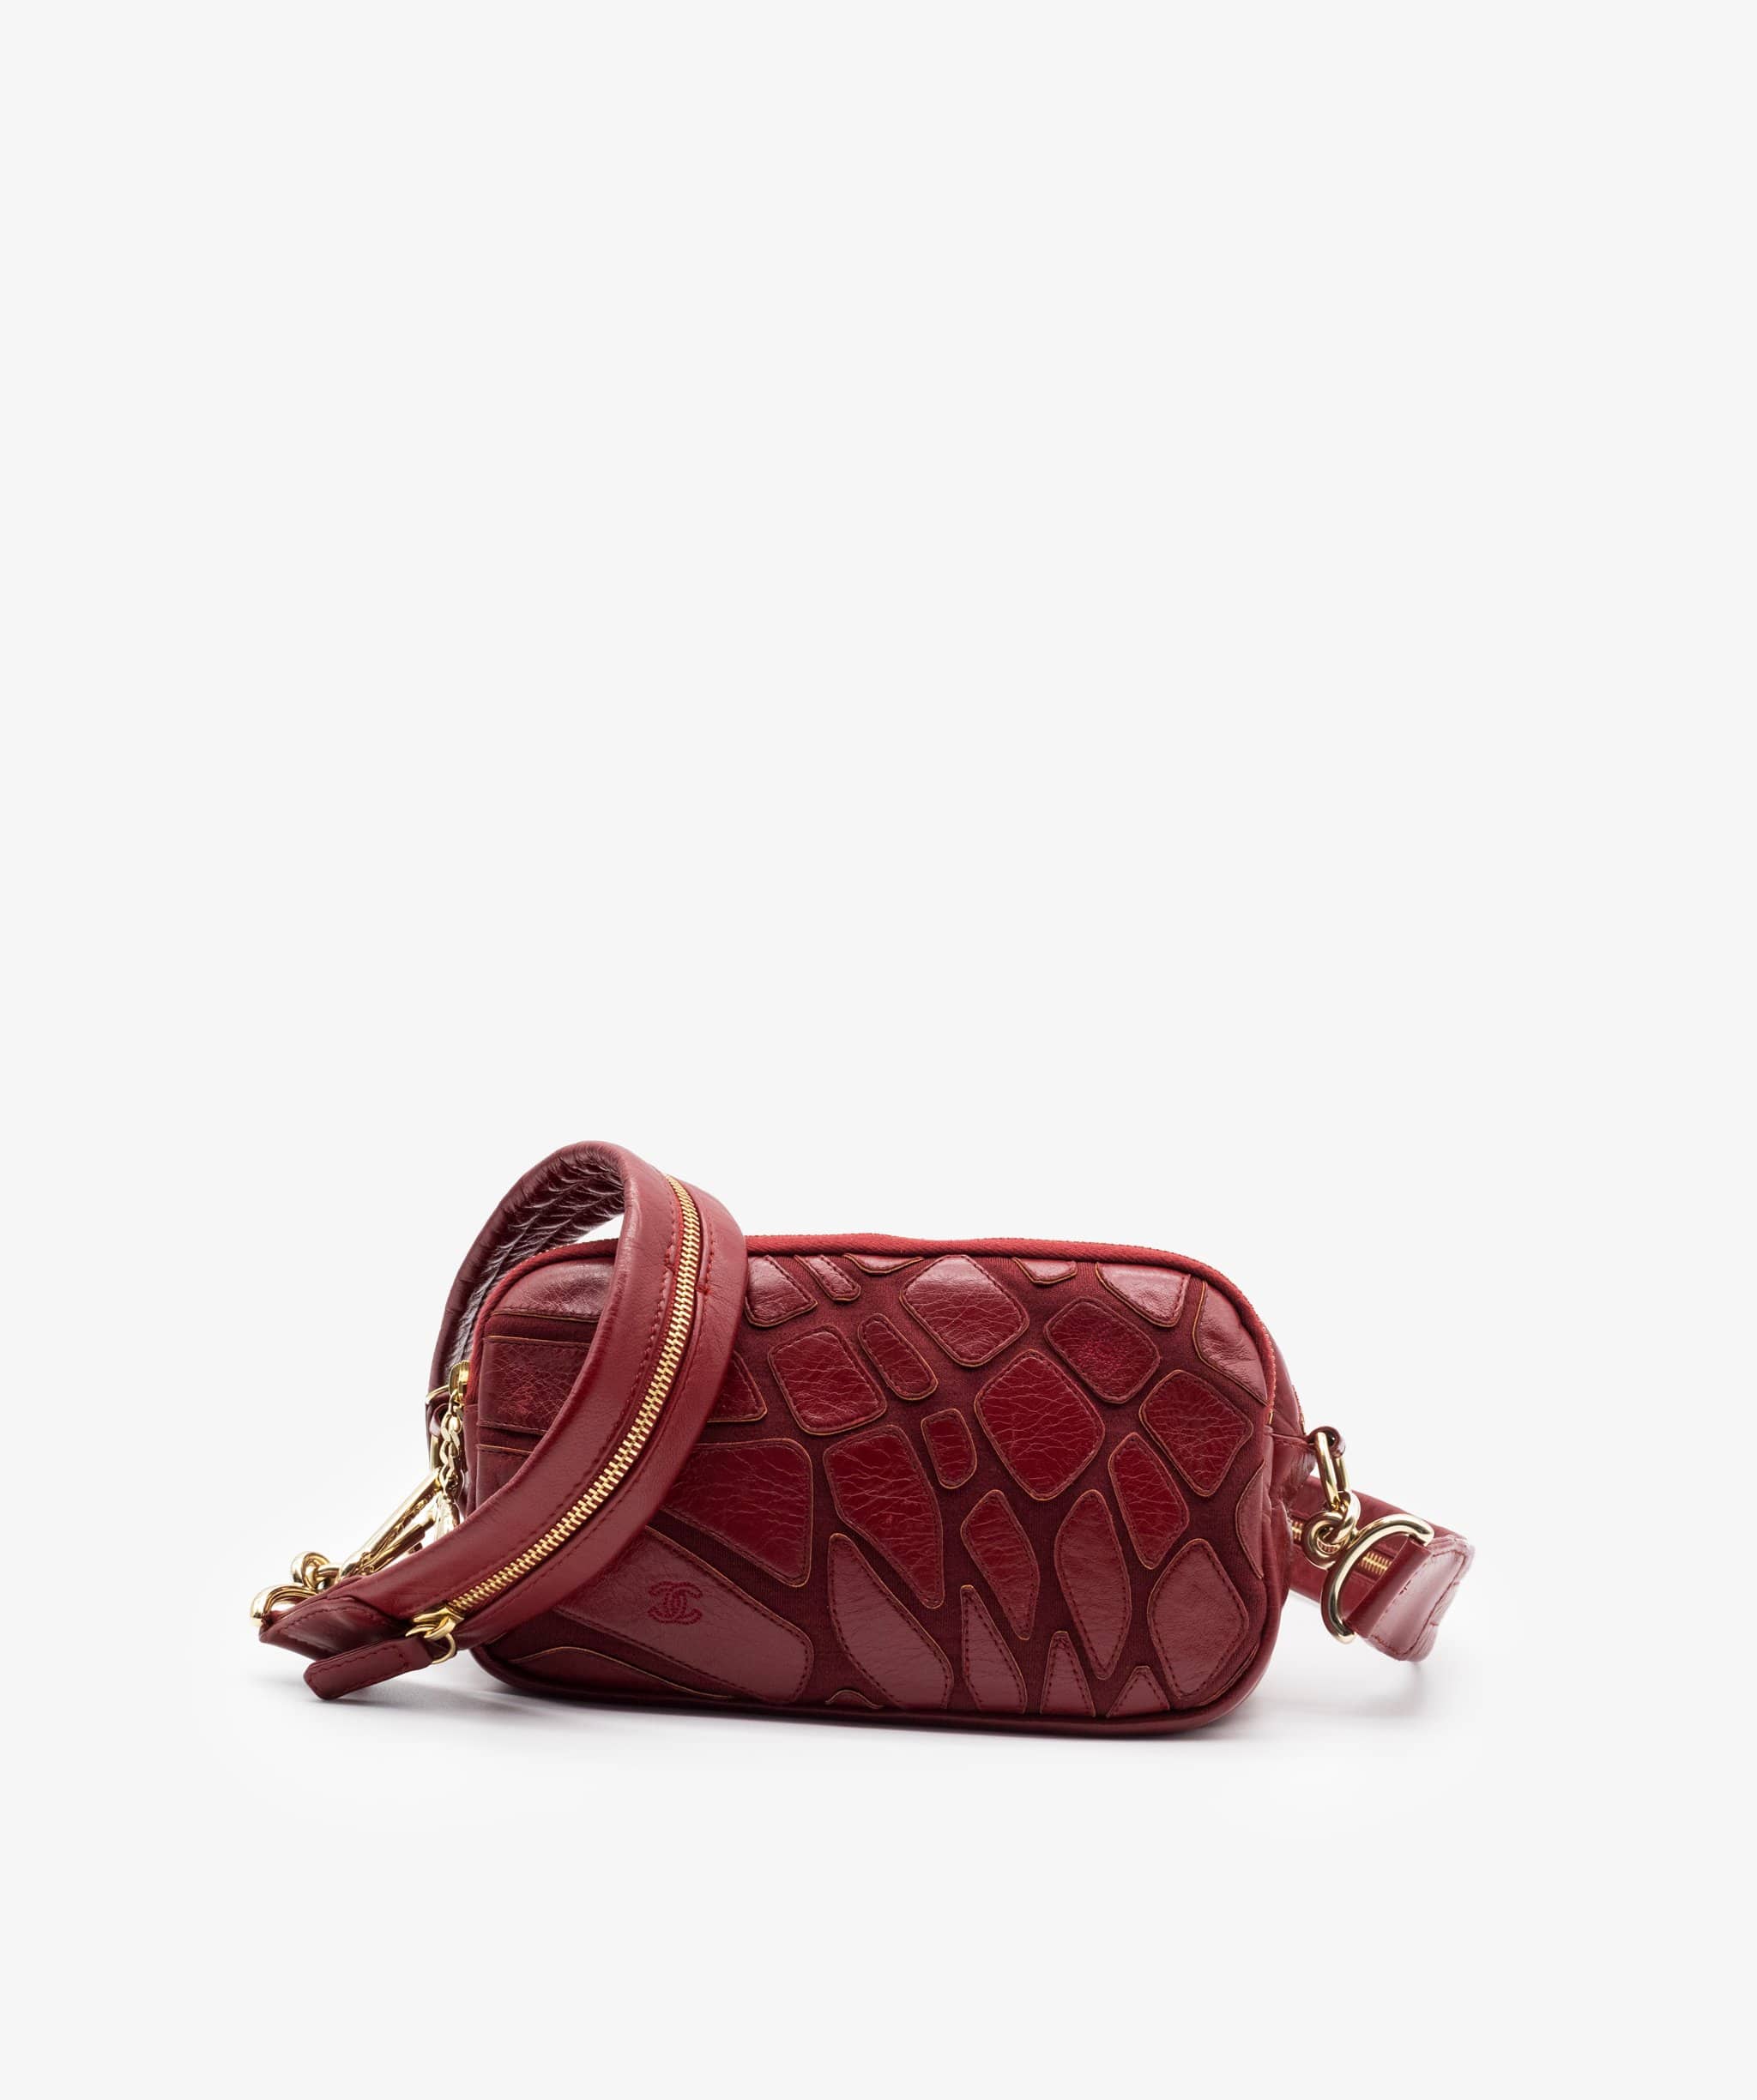 Chanel Chanel Red Calfskin Leather Vintage Crossbody